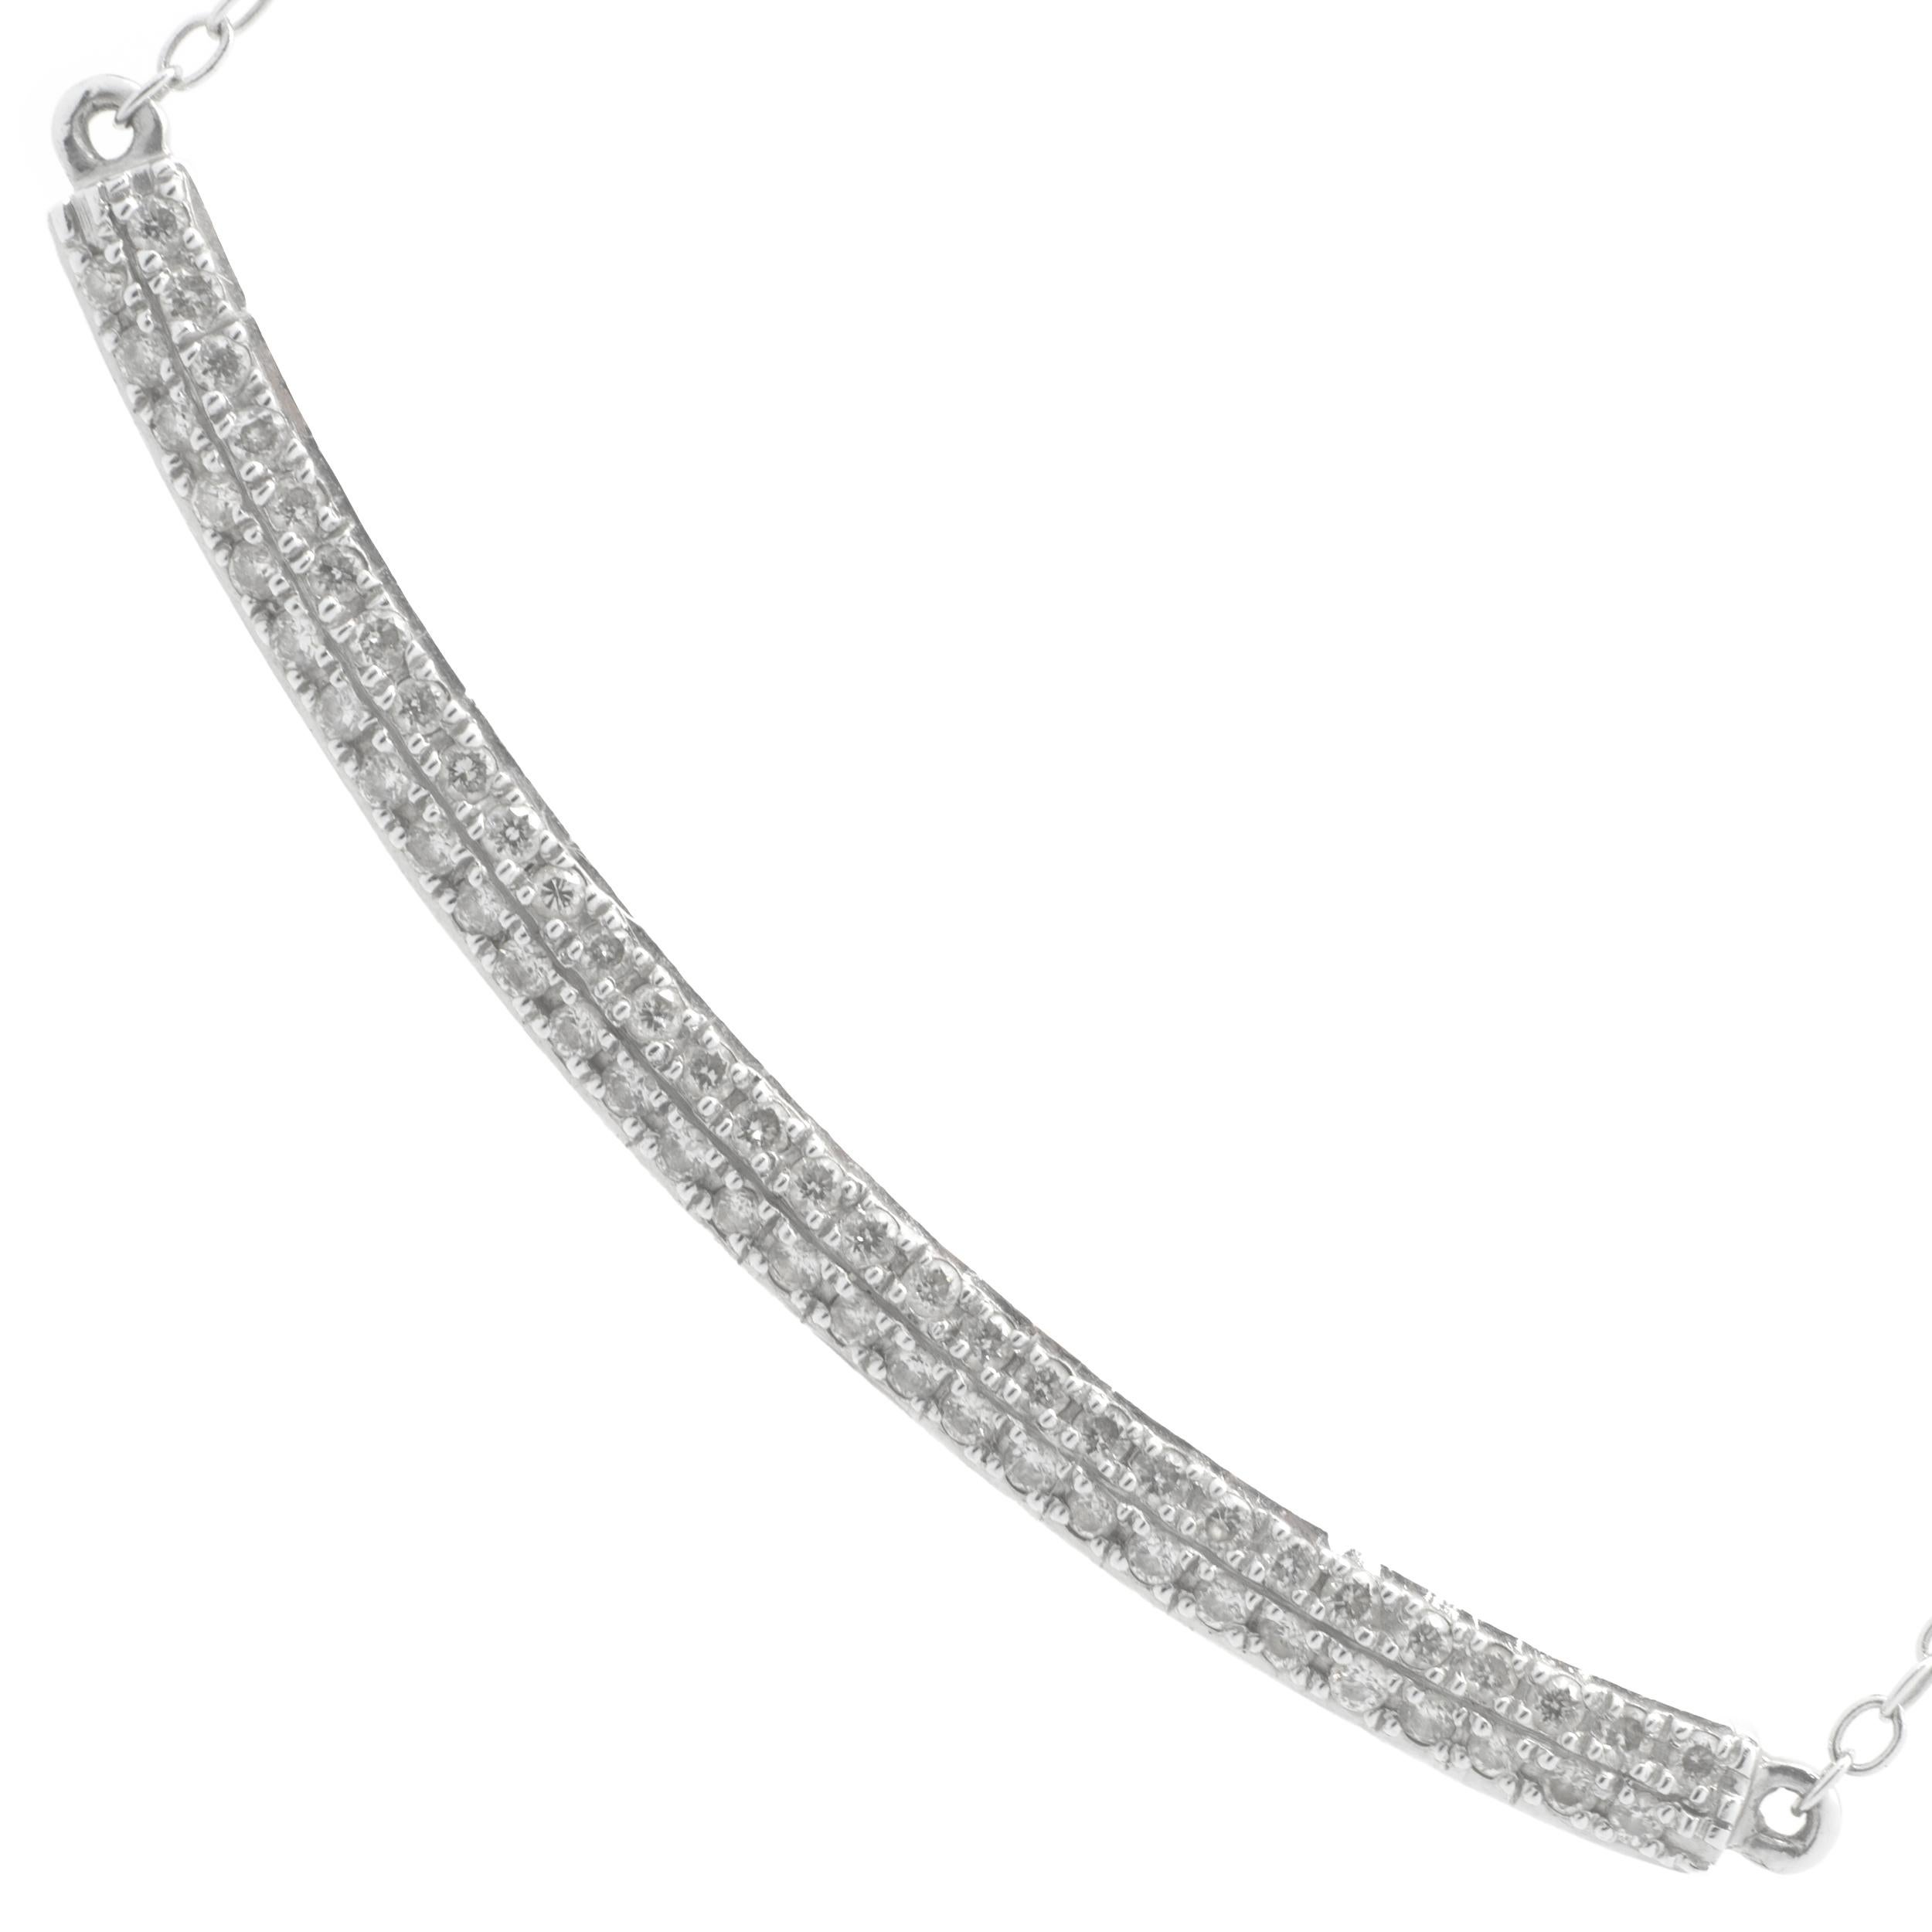 Designer: custom design
Material: 14K white gold
Diamonds: 58 round brilliant cut = .29cttw
Color: J
Clarity: SI1
Dimensions: necklace measures 18-inches in length 
Weight: 2.24 grams
